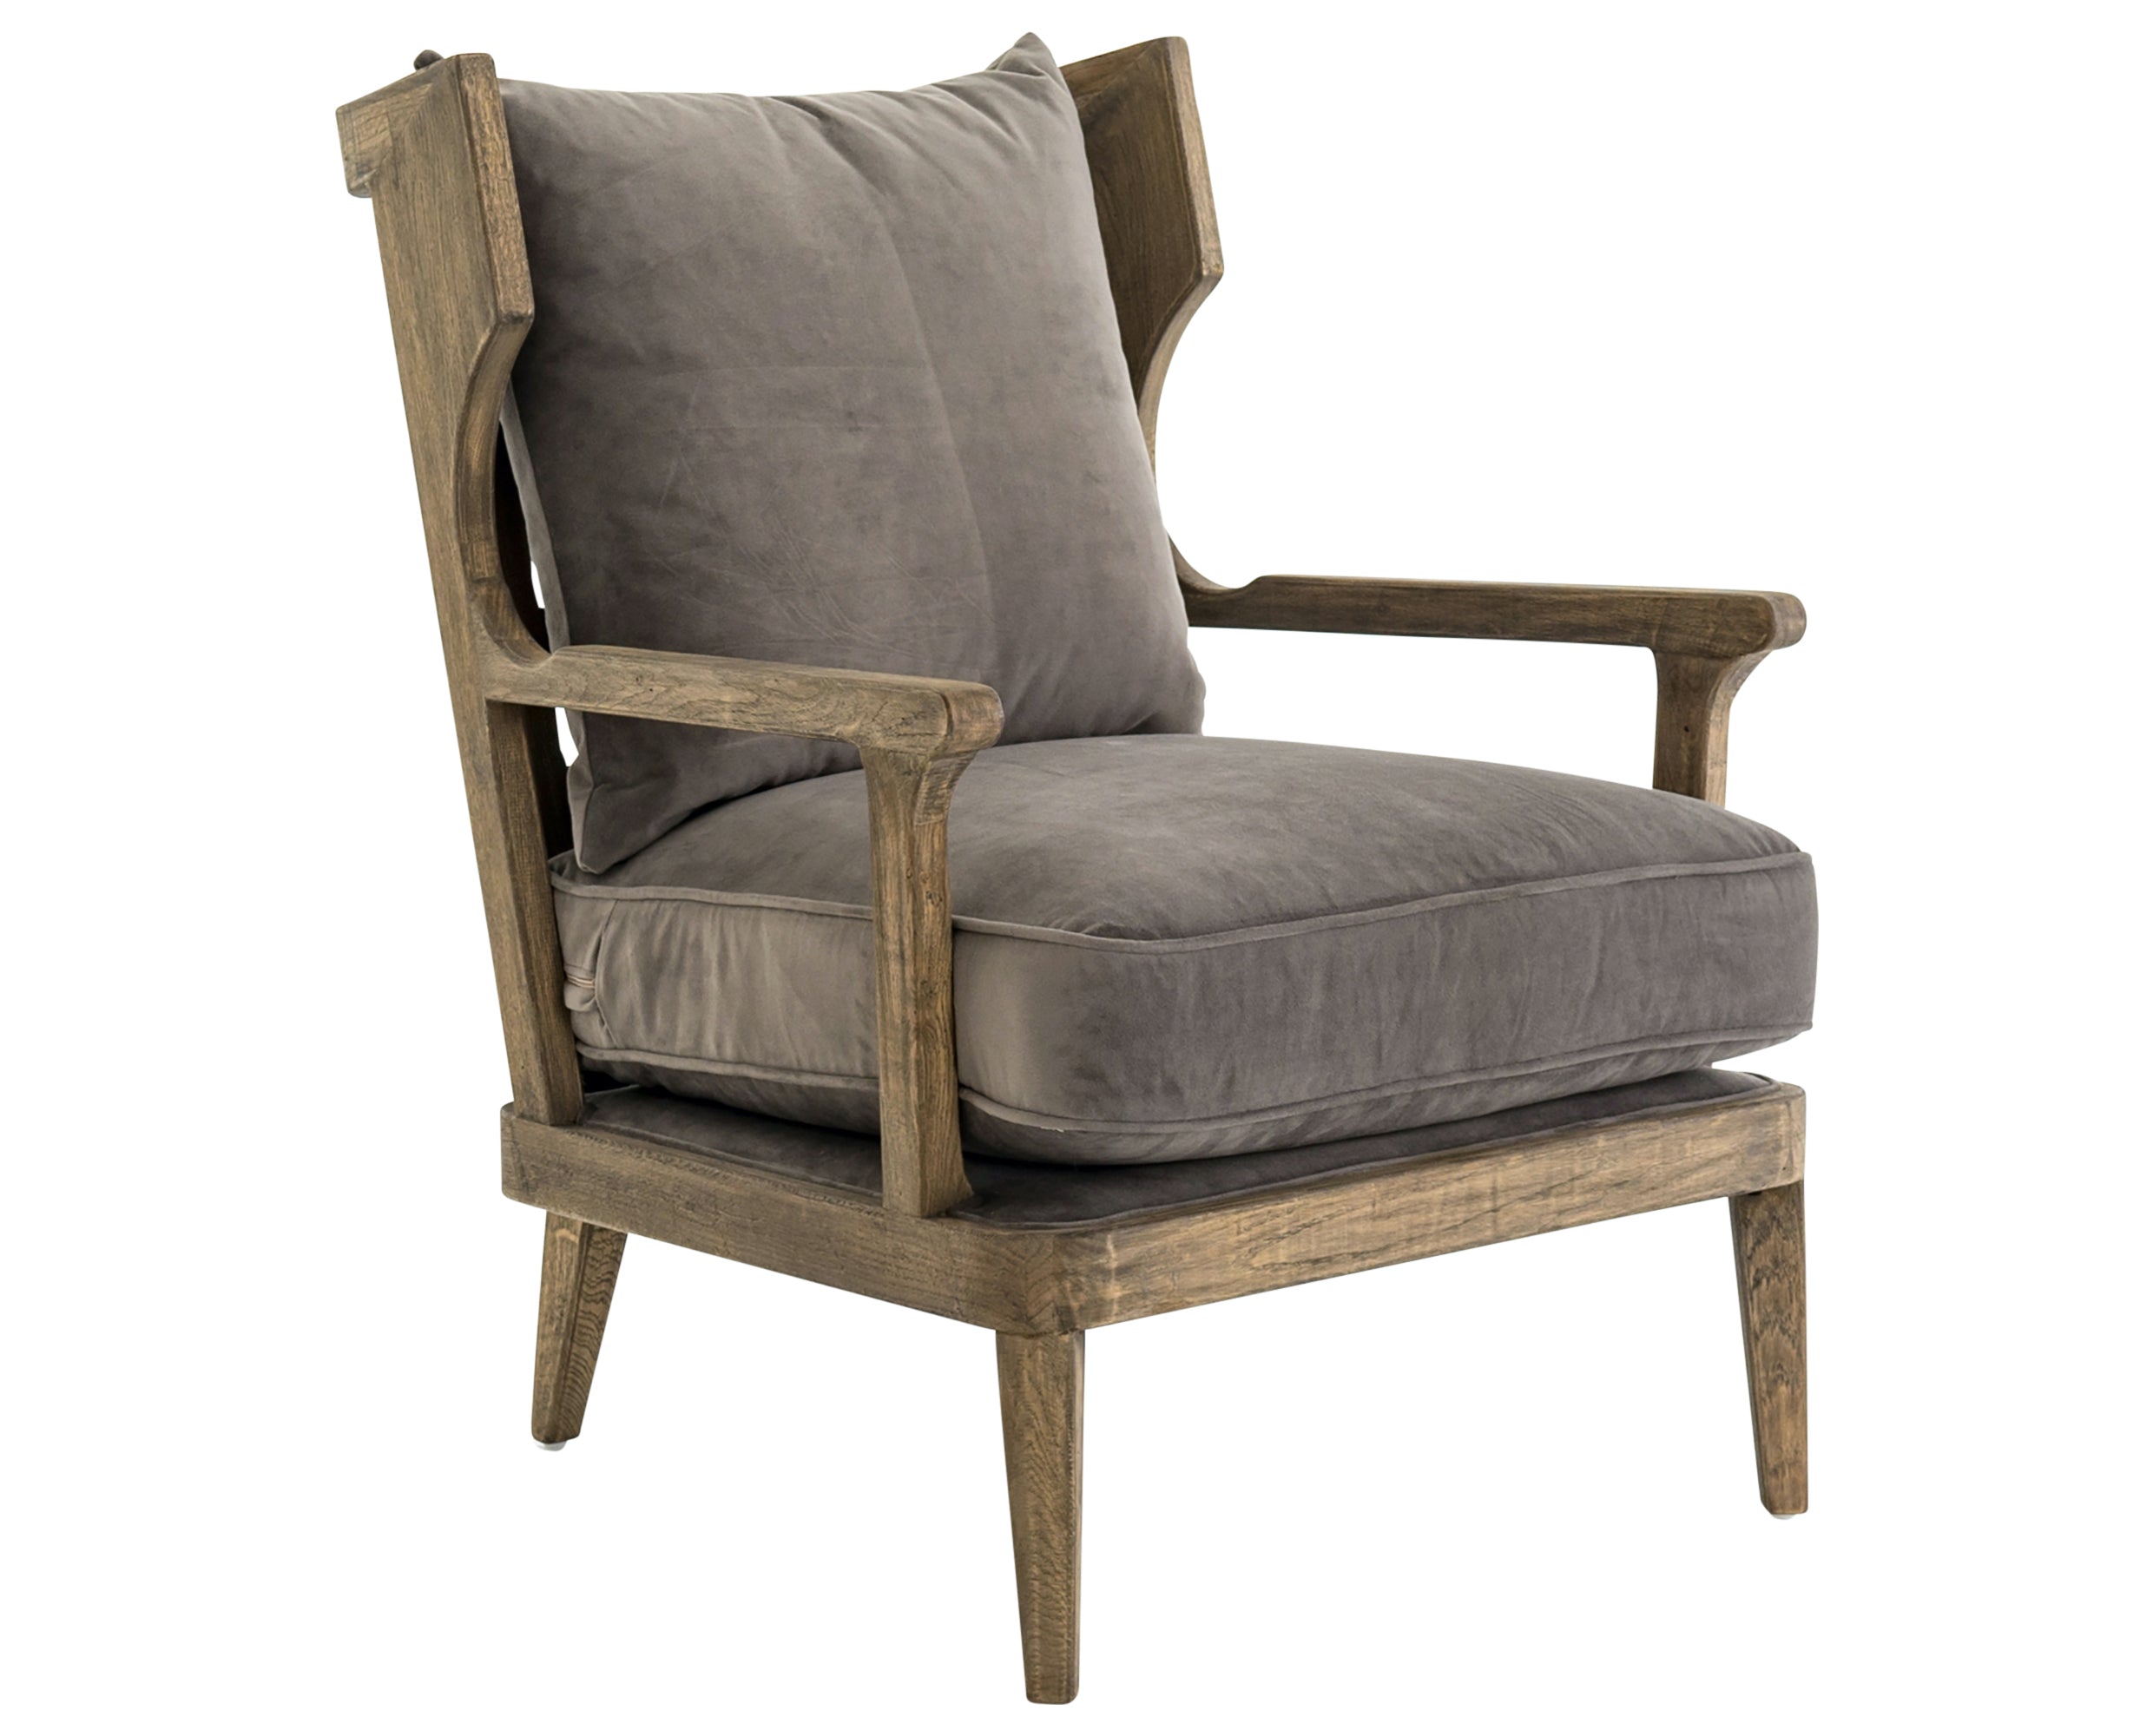 Imperial Mist Fabric & Lamont Natural Parawood | Lennon Chair | Valley Ridge Furniture